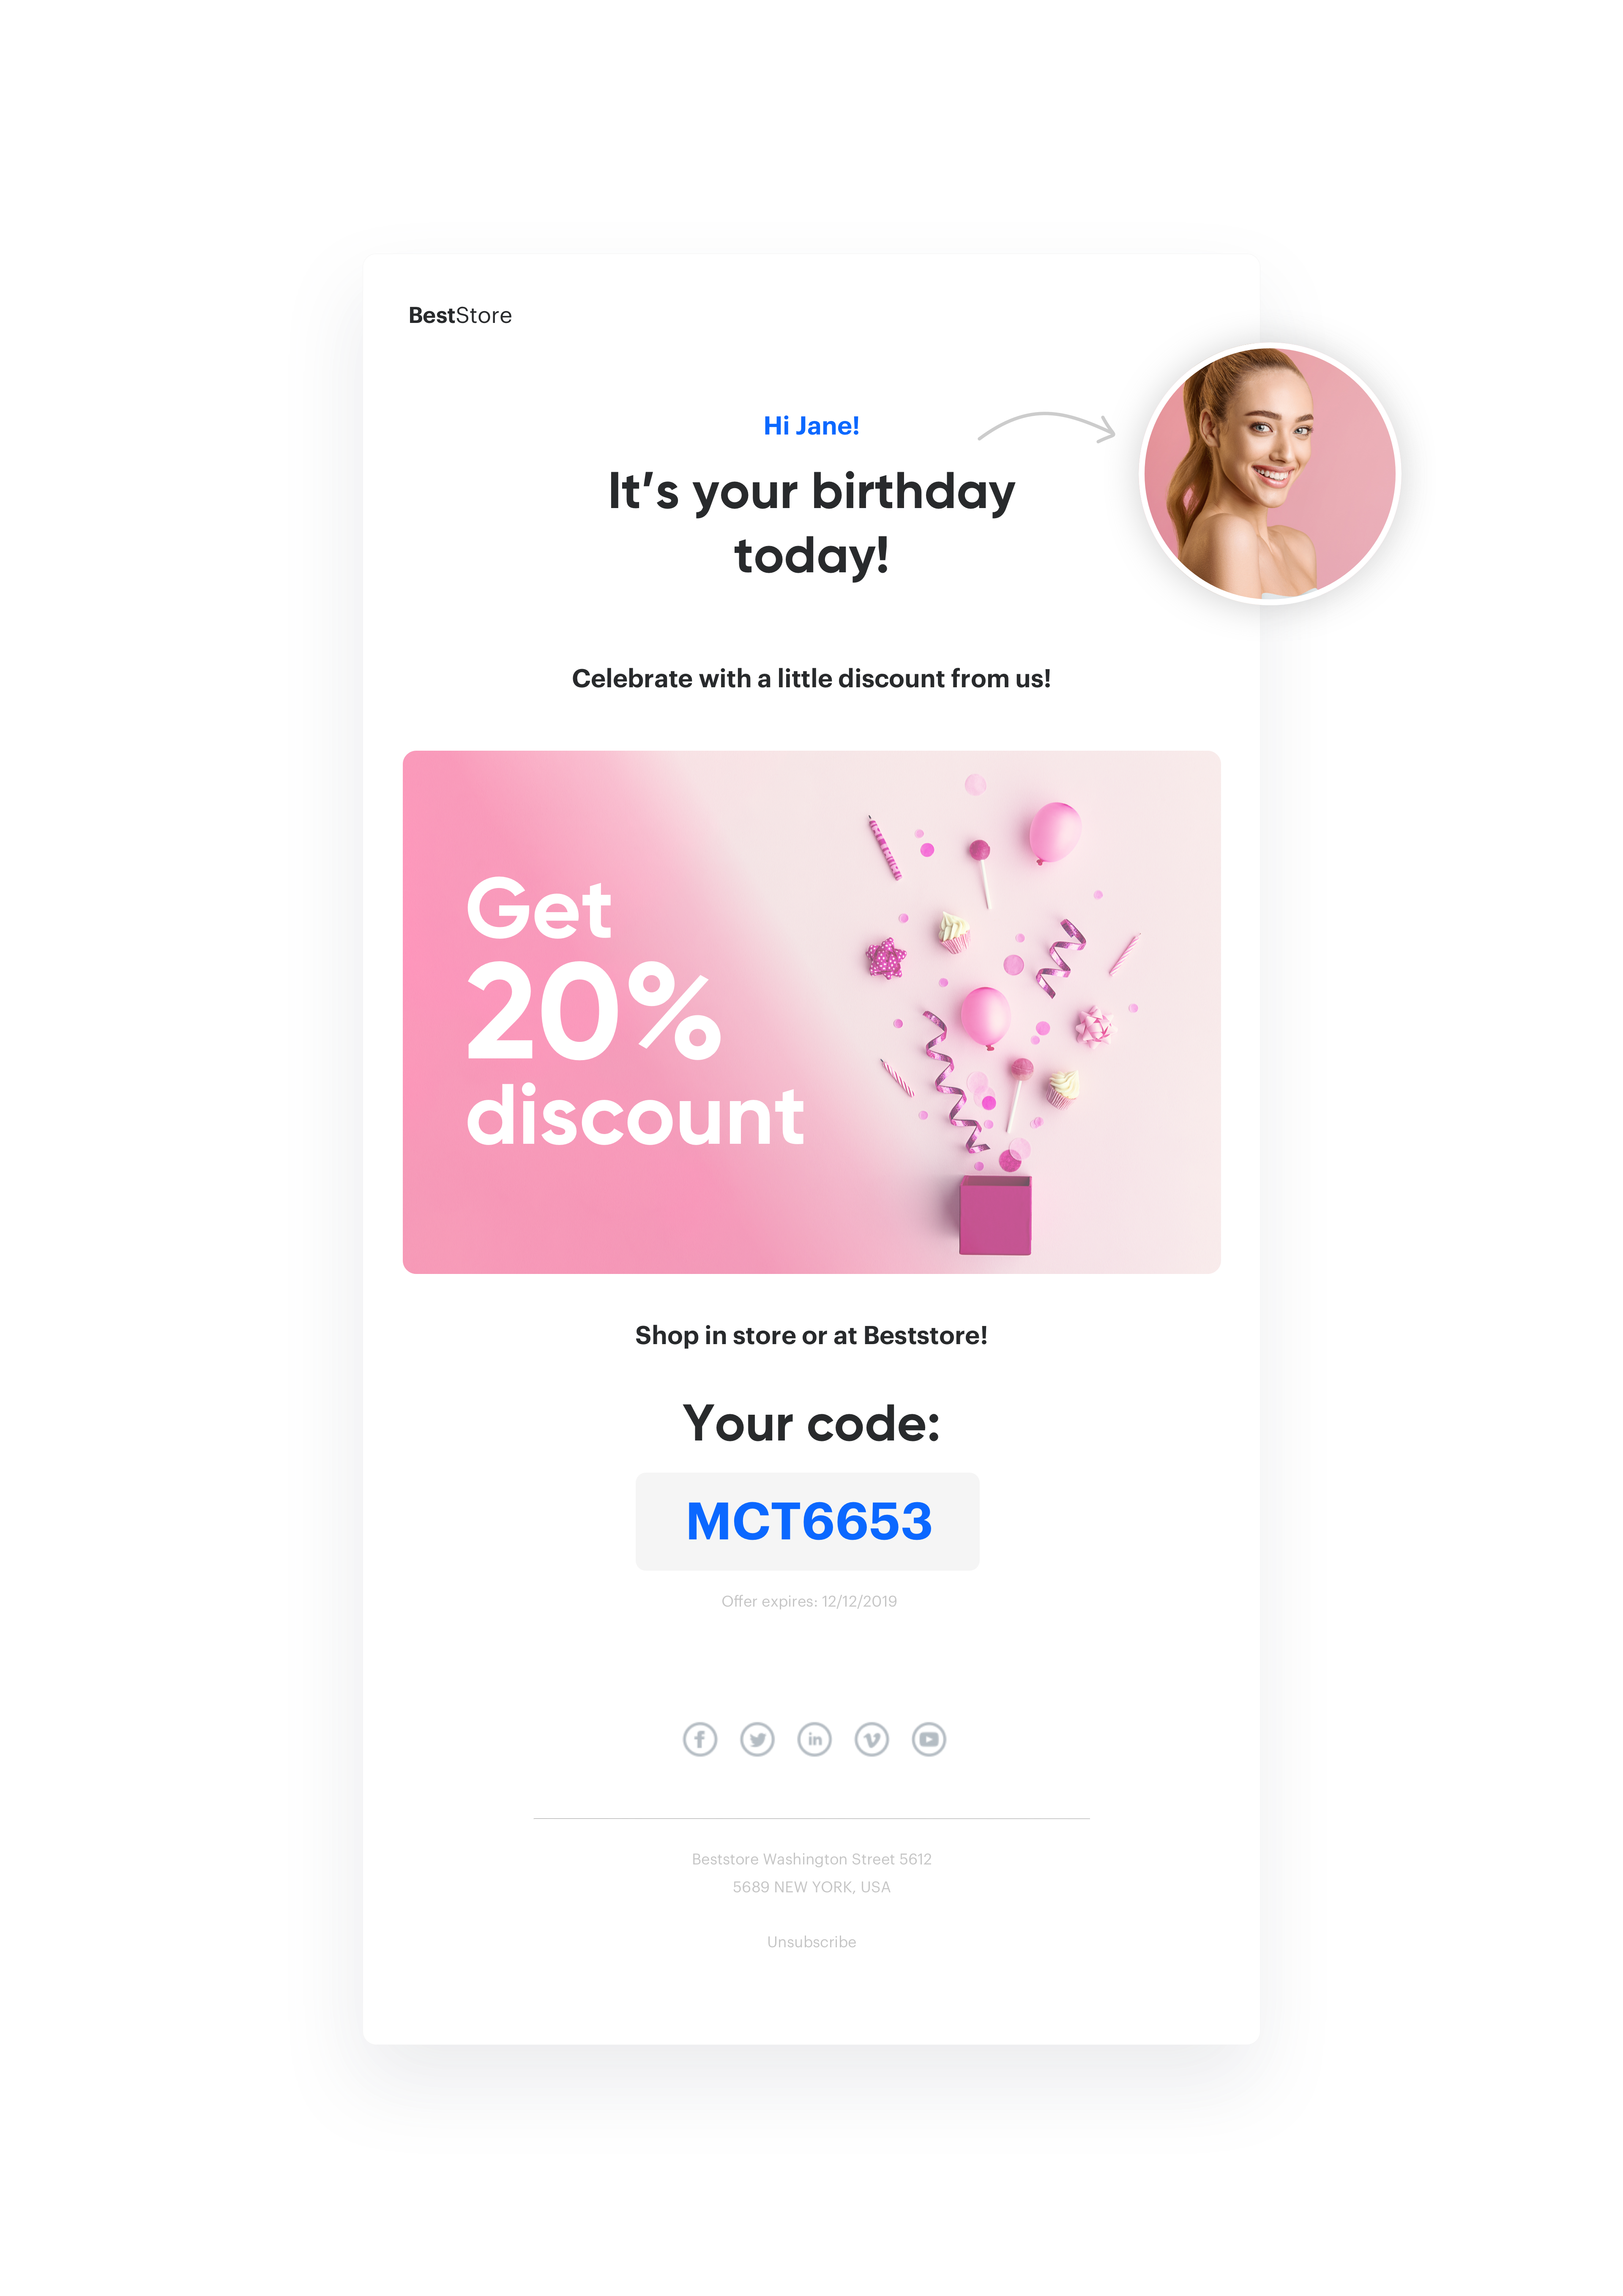 Email with a birthday coupon